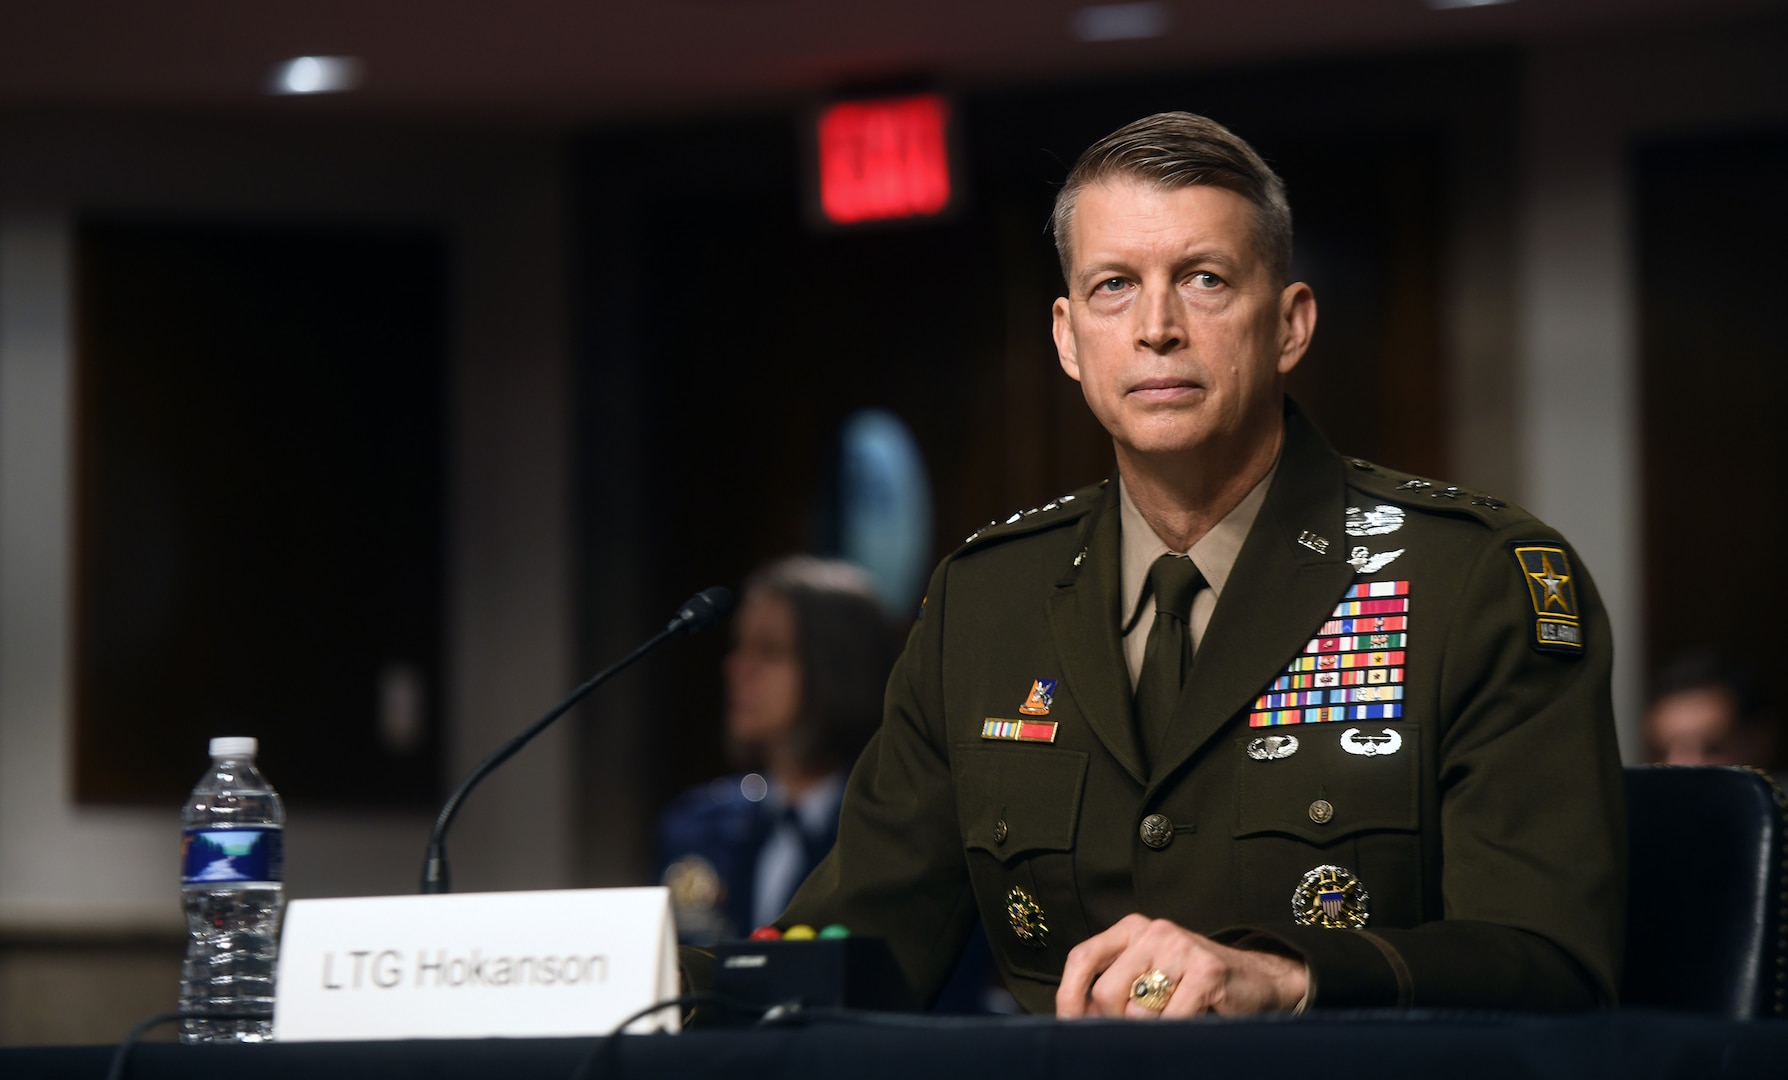 Army Lt. Gen. Daniel Hokanson testifies before the U.S. Senate Committee on Armed Services at a confirmation hearing for his appointment to the grade of general and to be chief of the National Guard Bureau, Dirksen Senate Office Building, Washington, D.C., June 18, 2020. Hokanson was confirmed by the Senate July 20, 2020.